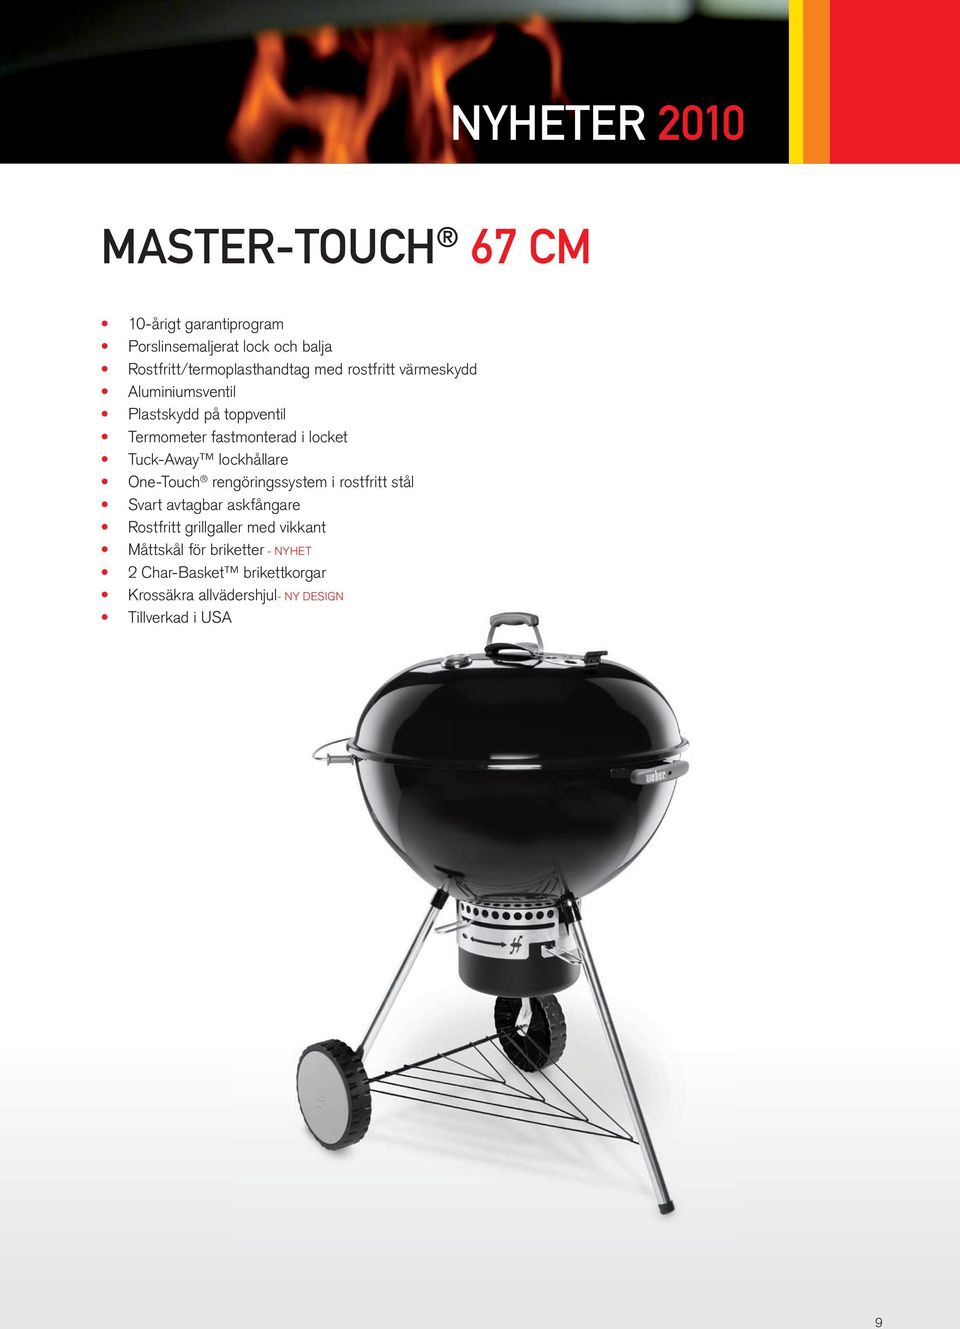 nyheter MASter-toUch 67 cm 09 one-touch deluxe 57 cm 10 one-touch pro  classic 11 performer M/ gasolantändning 12 performer 13 Weber tillbehör 14  - PDF Gratis nedladdning